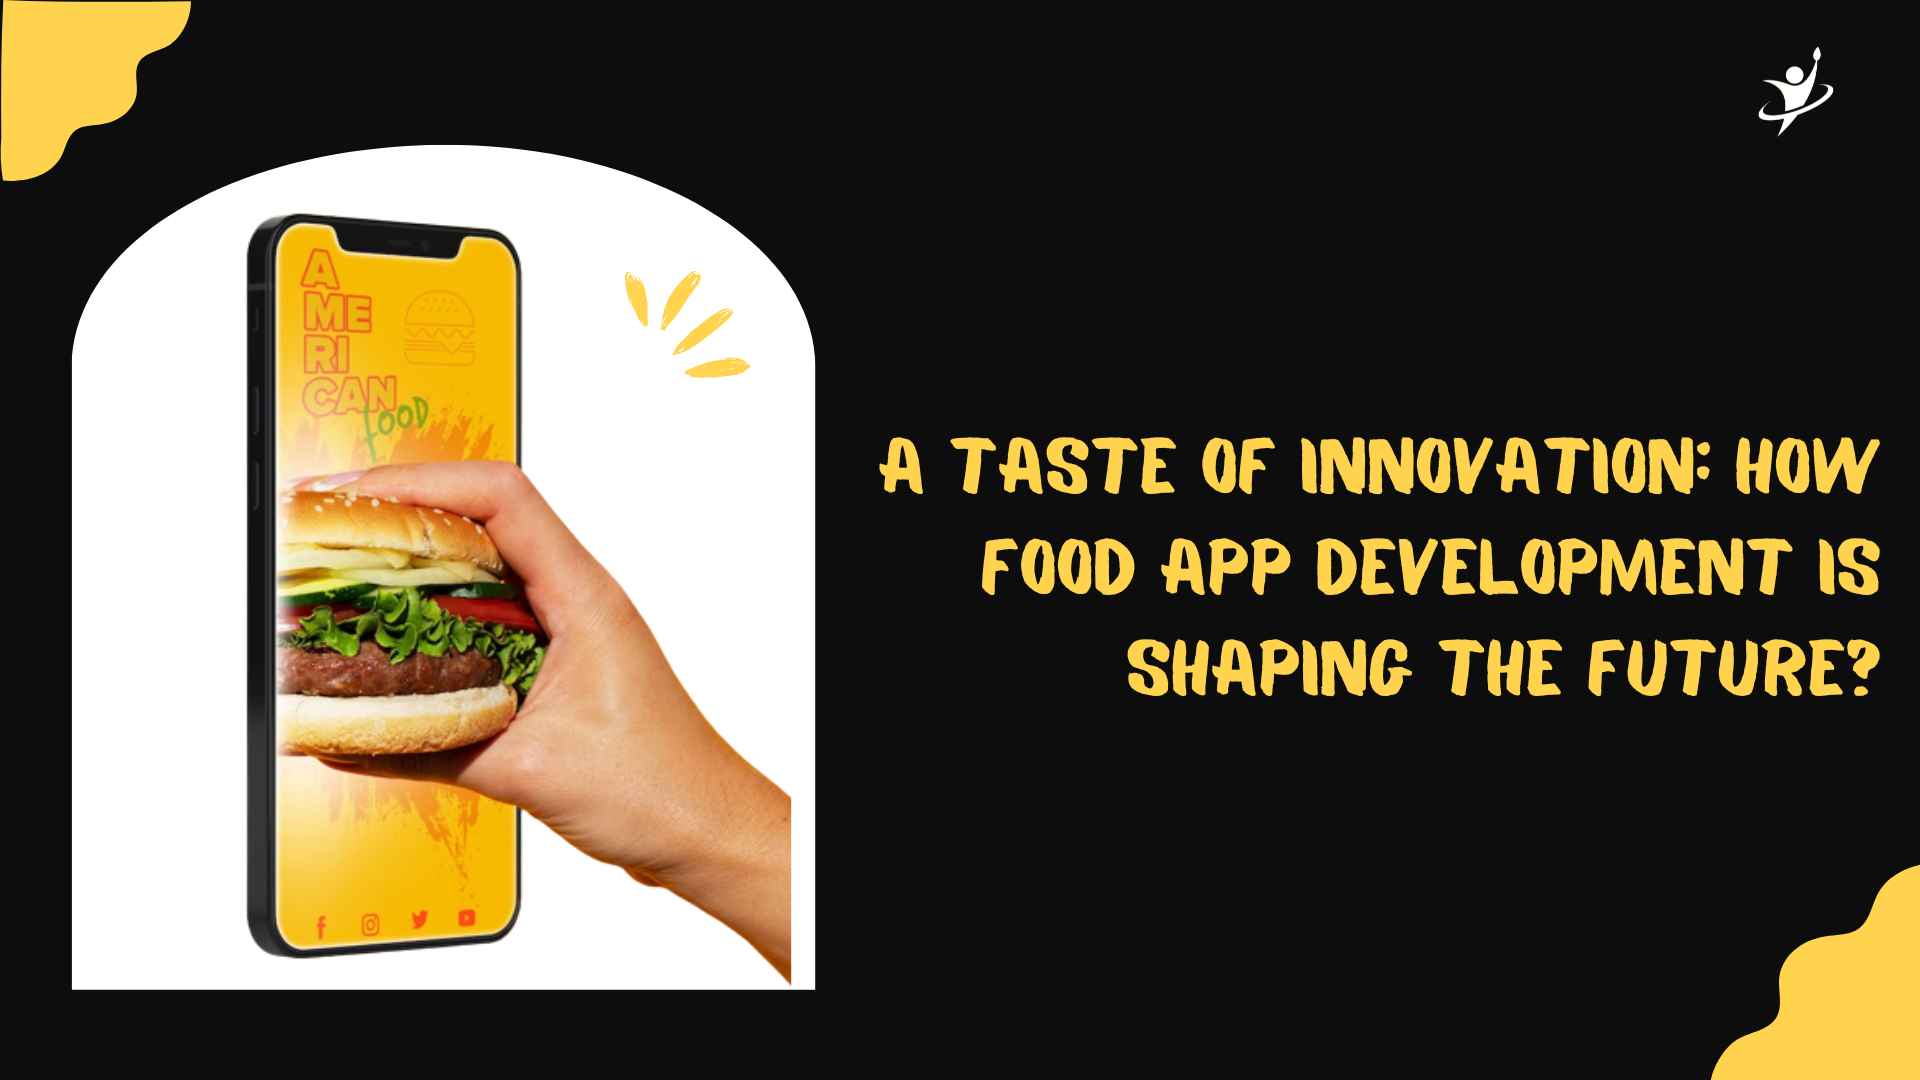 Food App Development is Shaping the Future